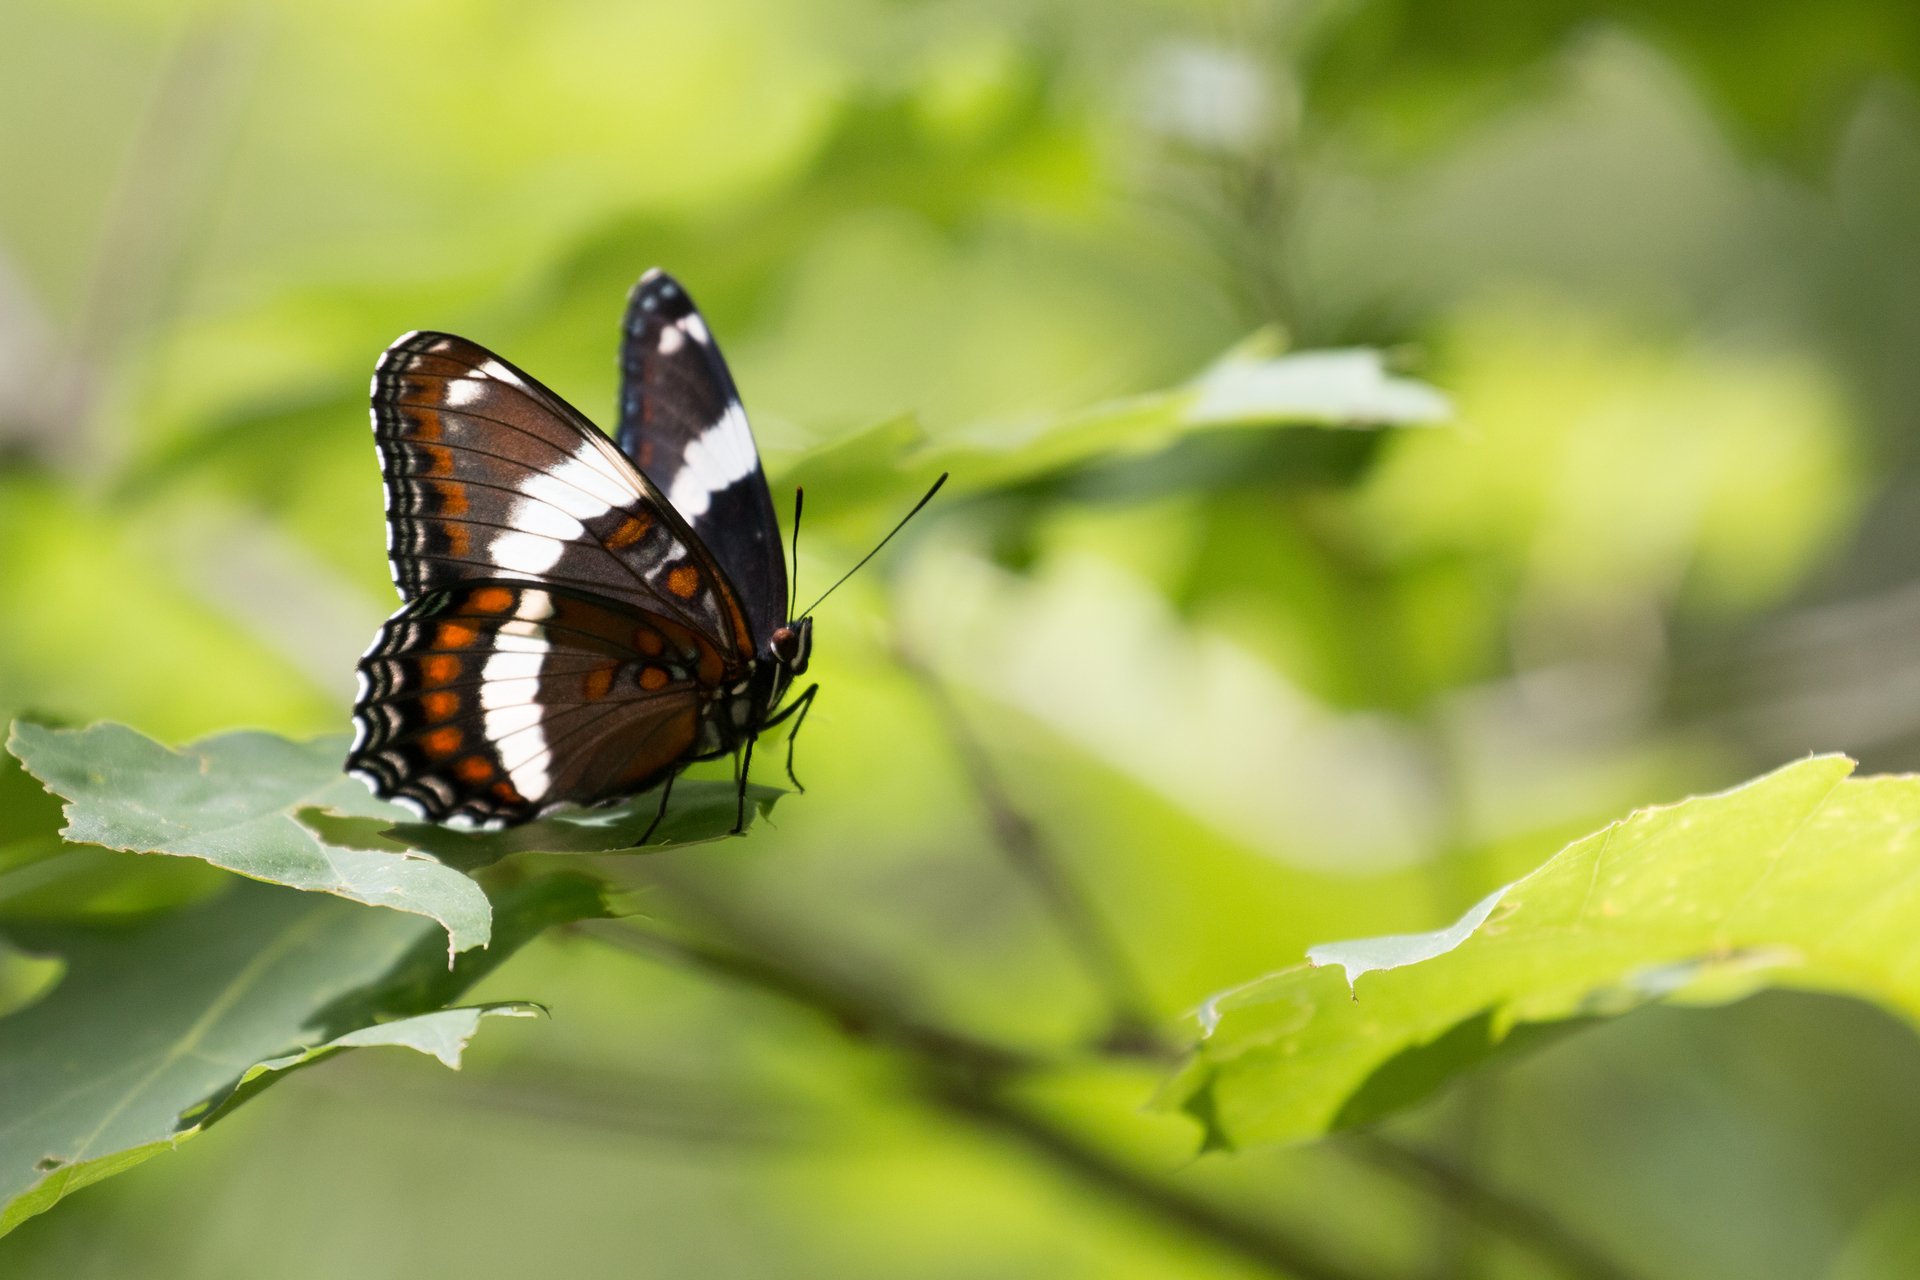 Black butterfly with white bands and orange dots on the wings.